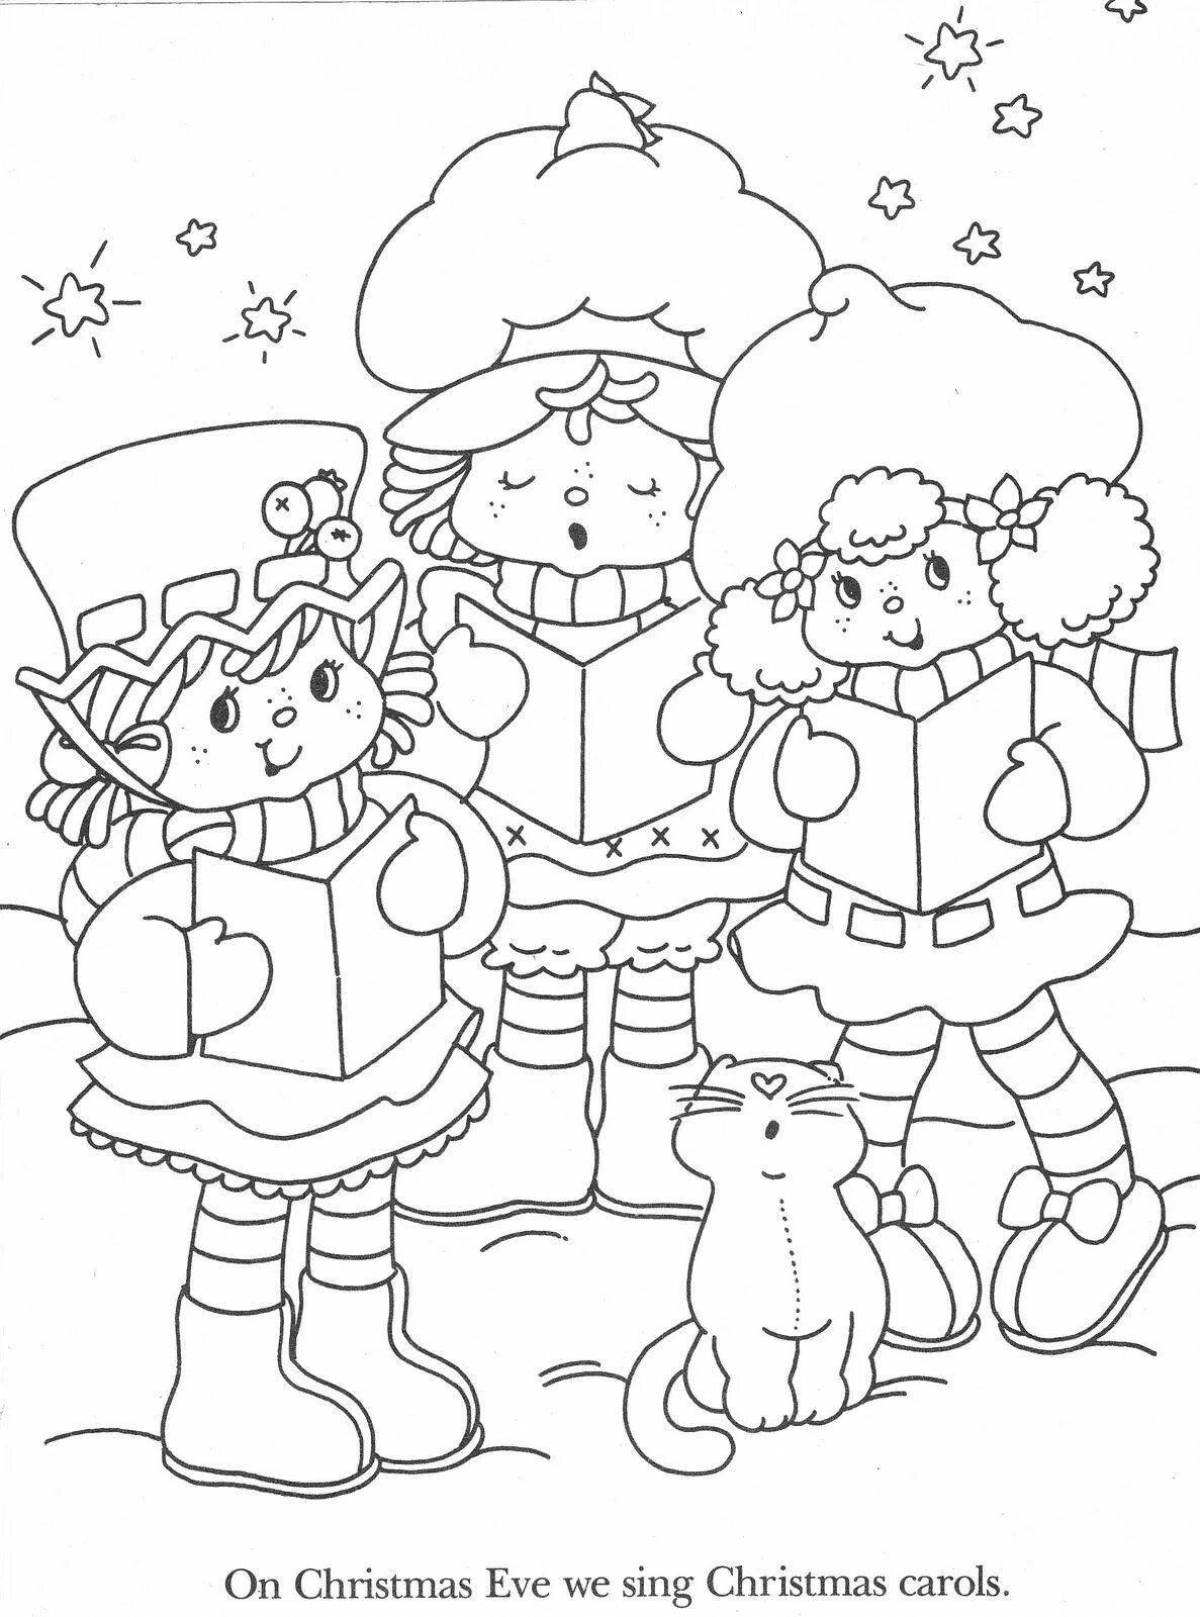 Great carol coloring pages for 4-5 year olds